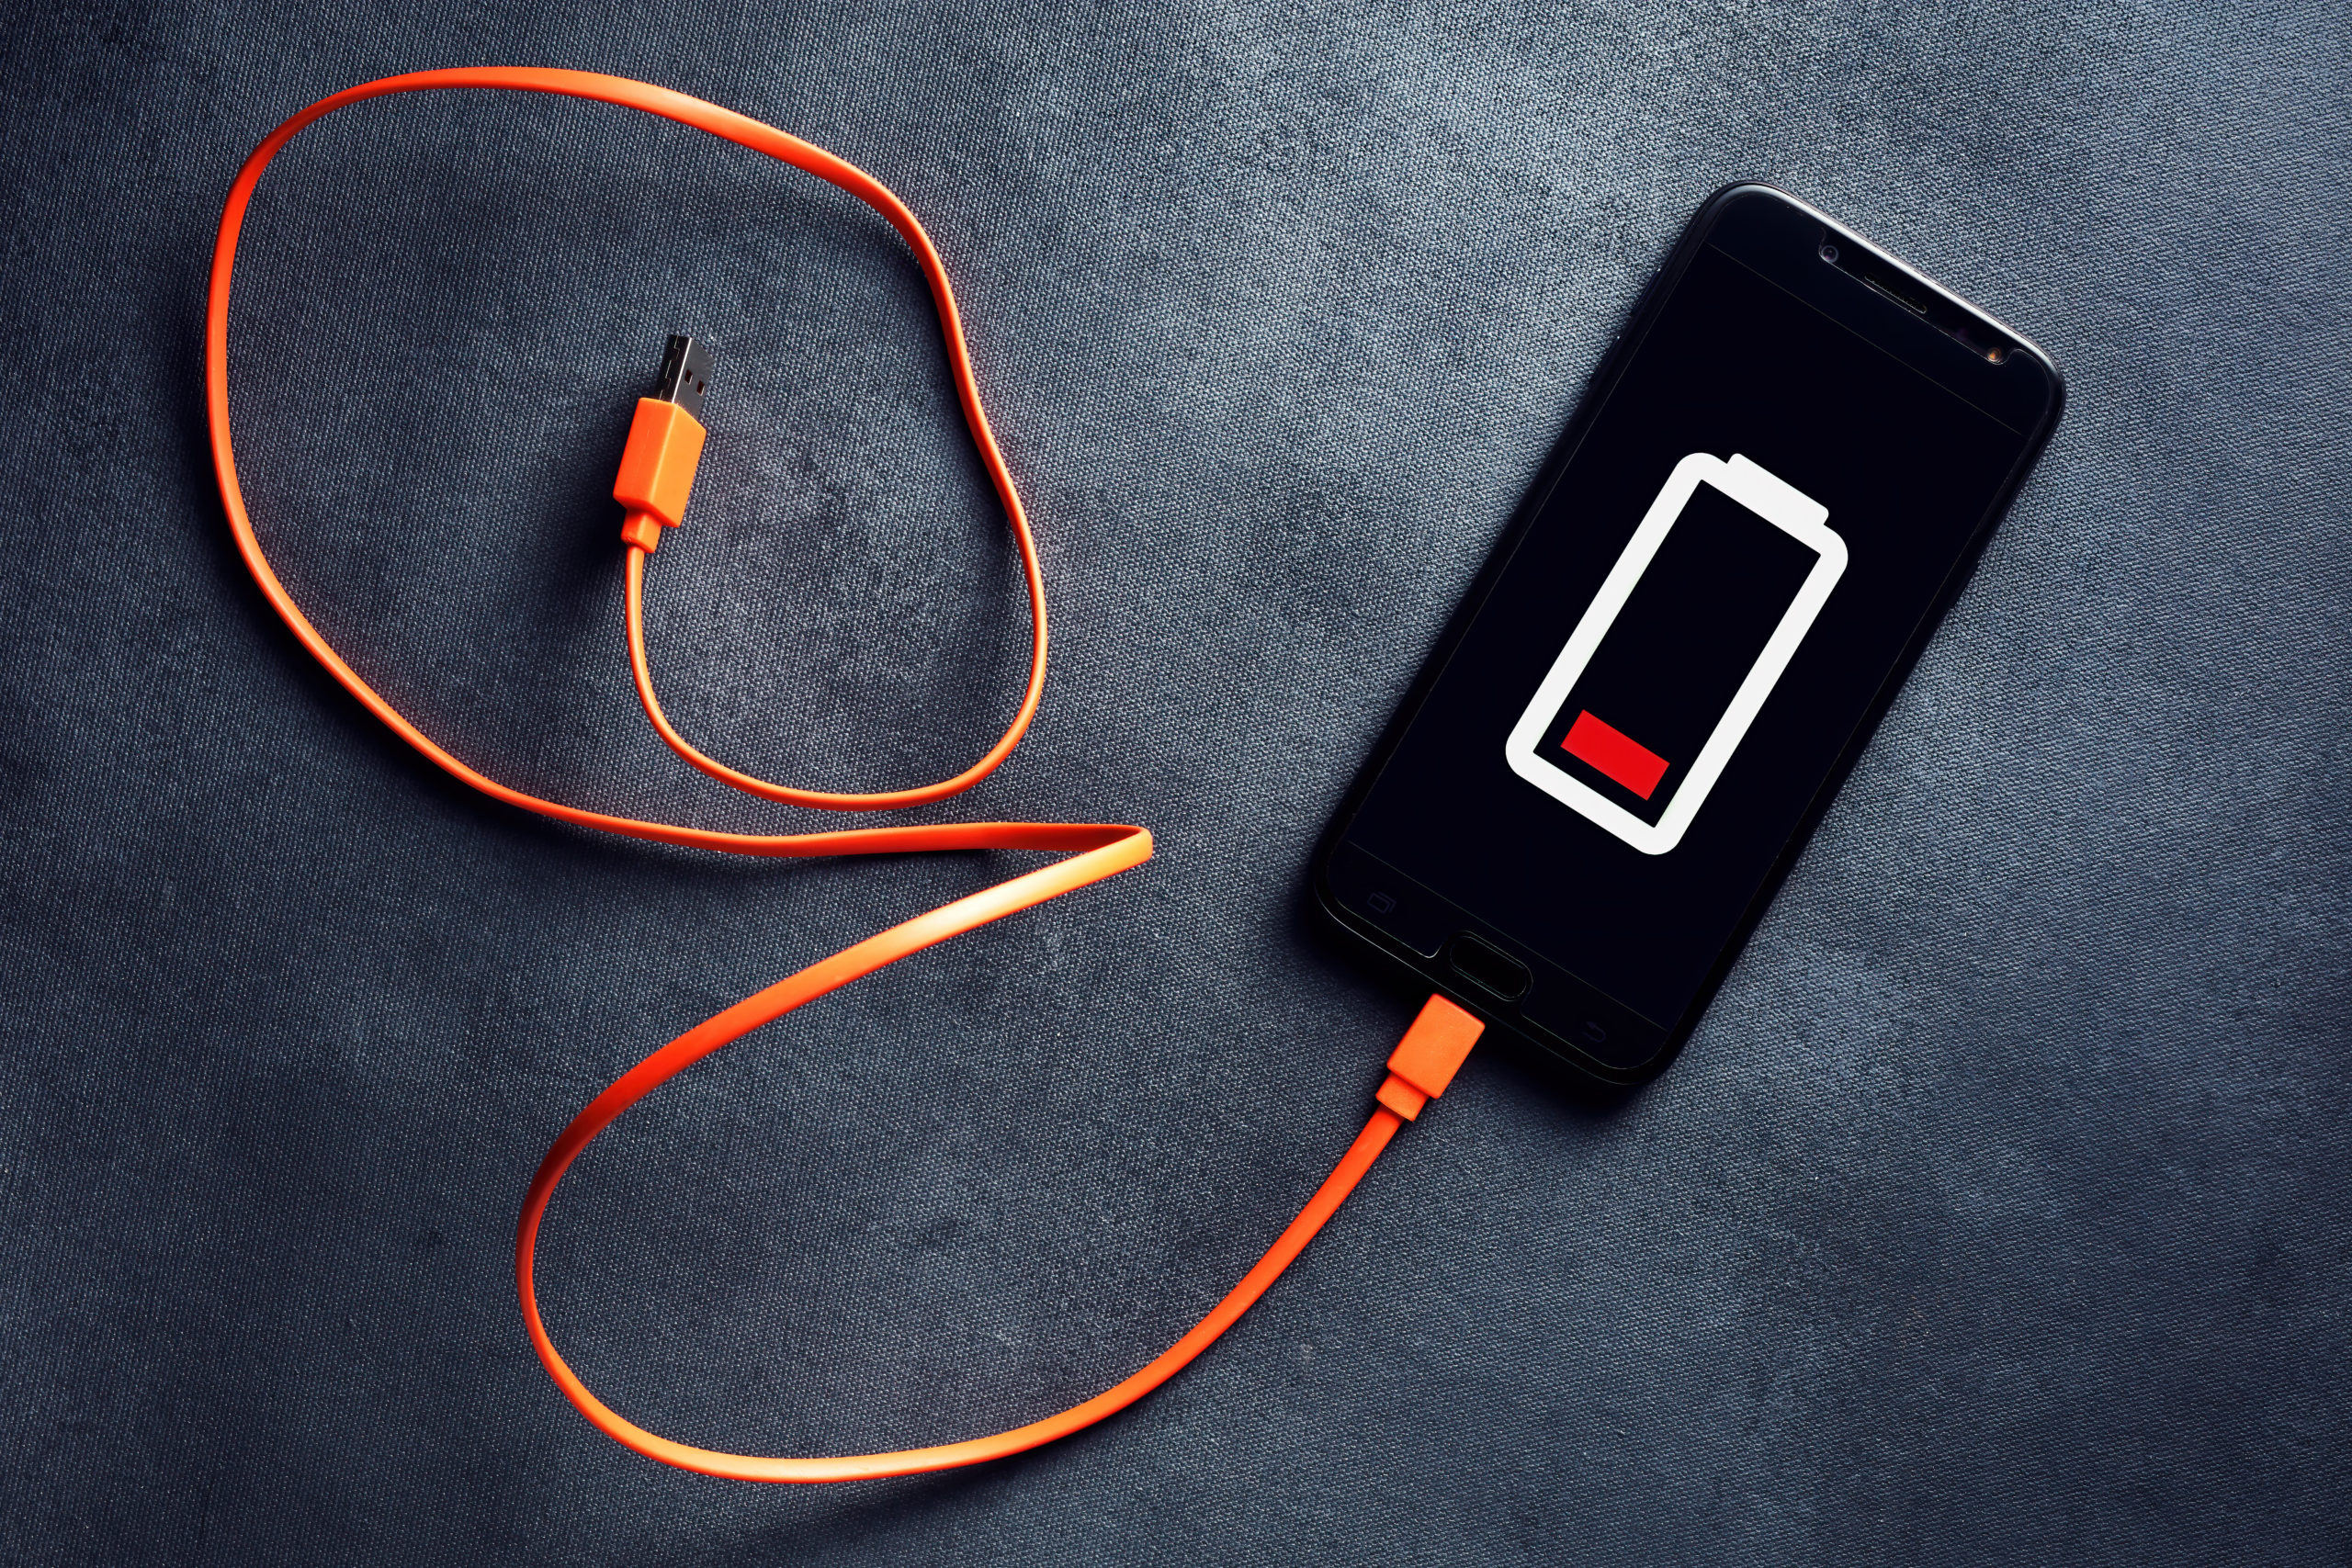 Your cell phone battery doesn't last because of these three useless functions